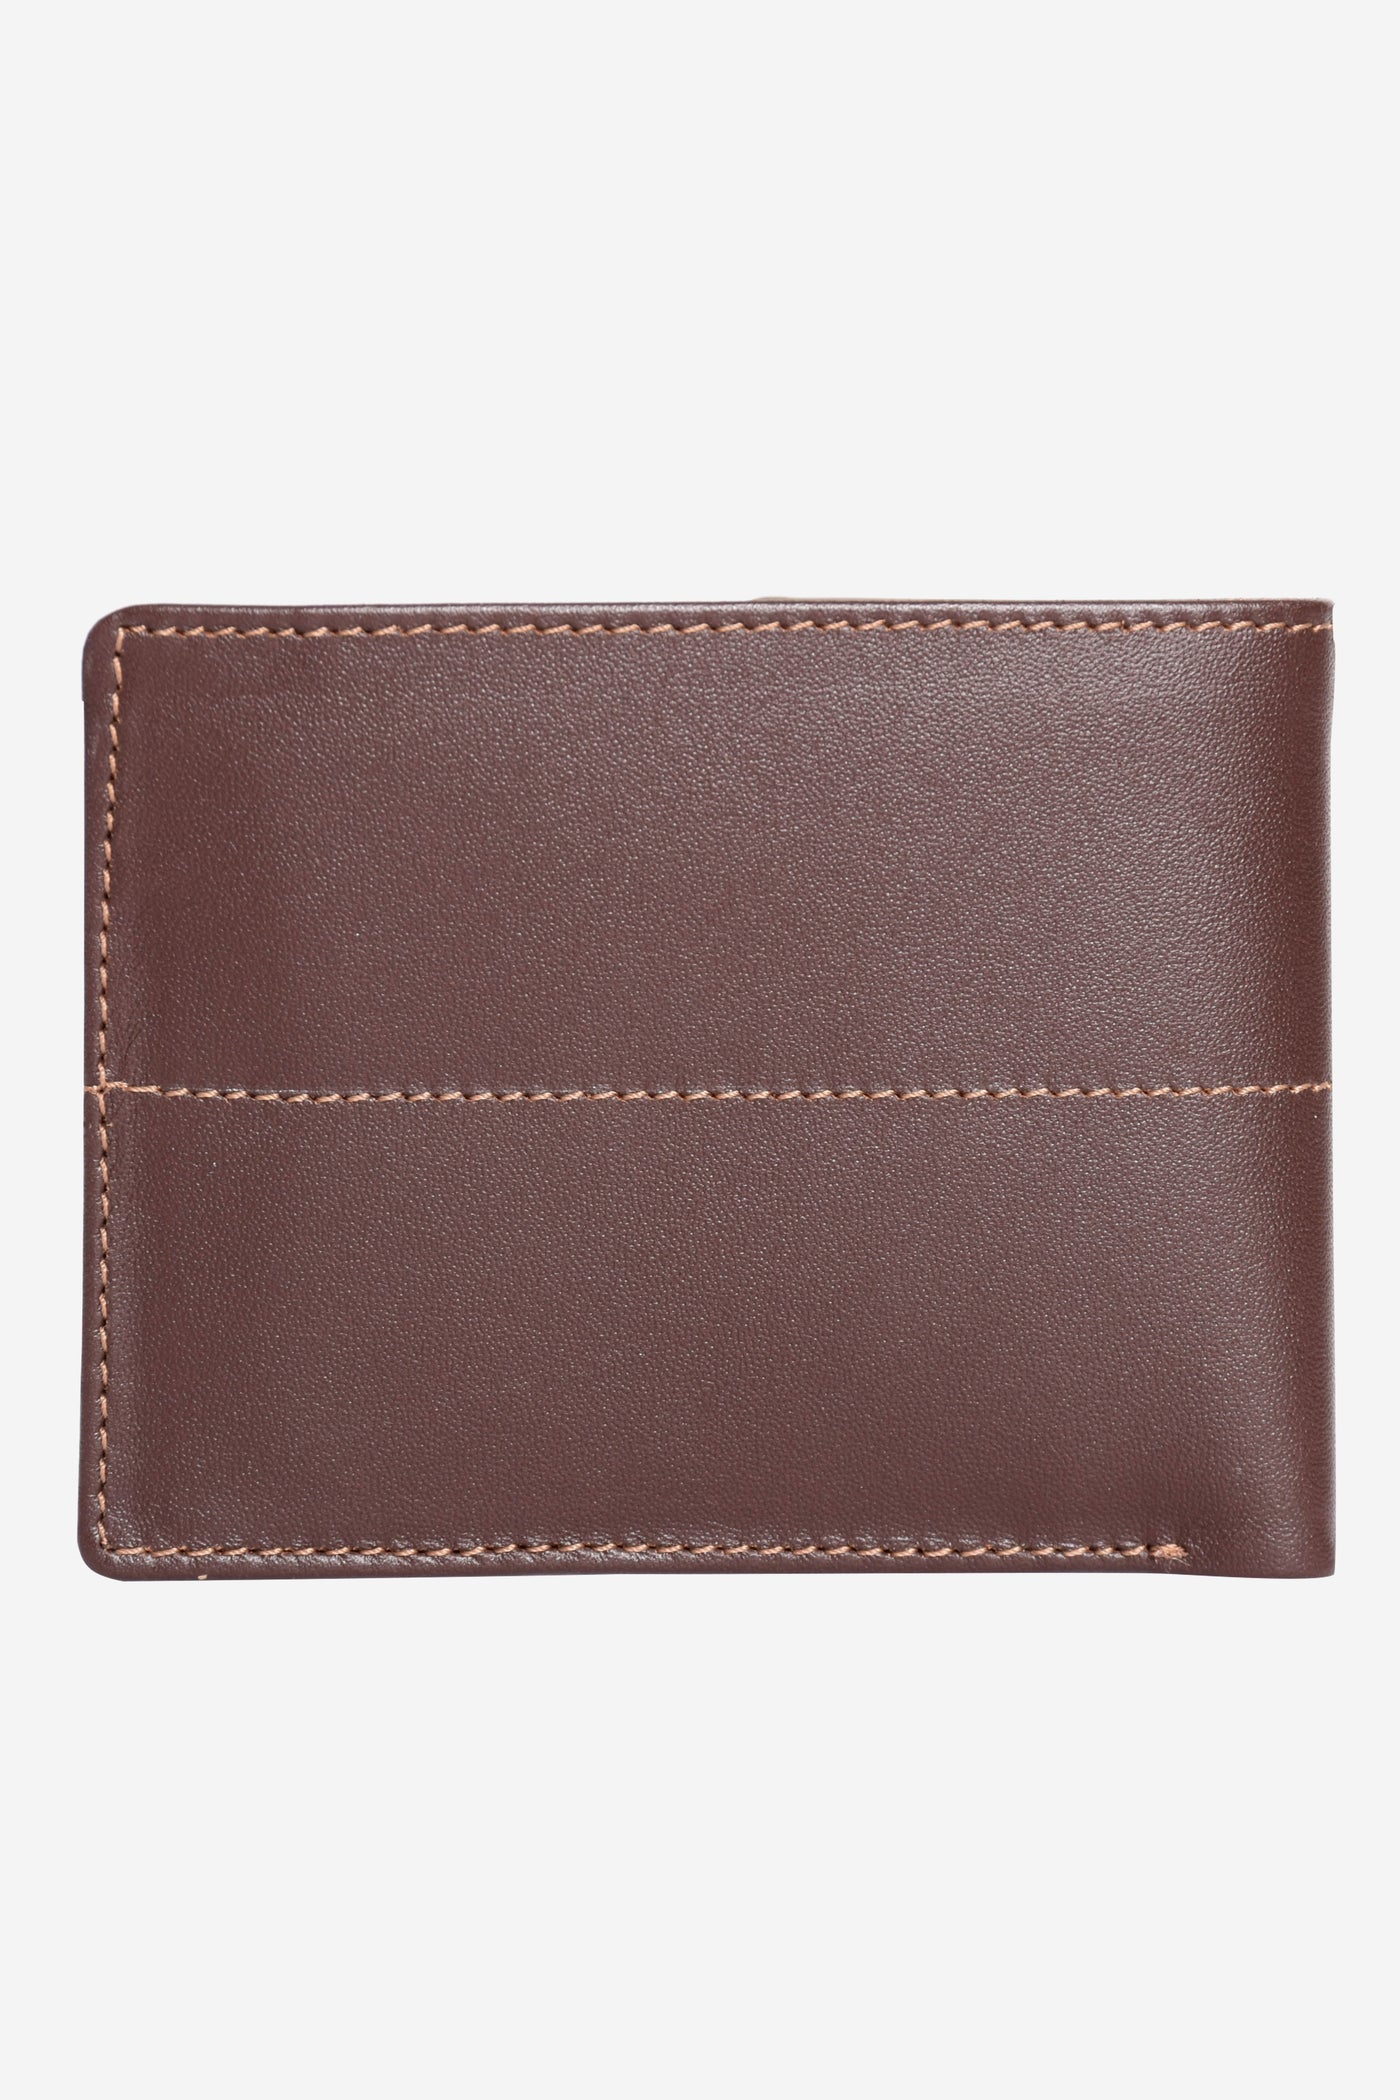 WAL012 / Brown Leather Wallet